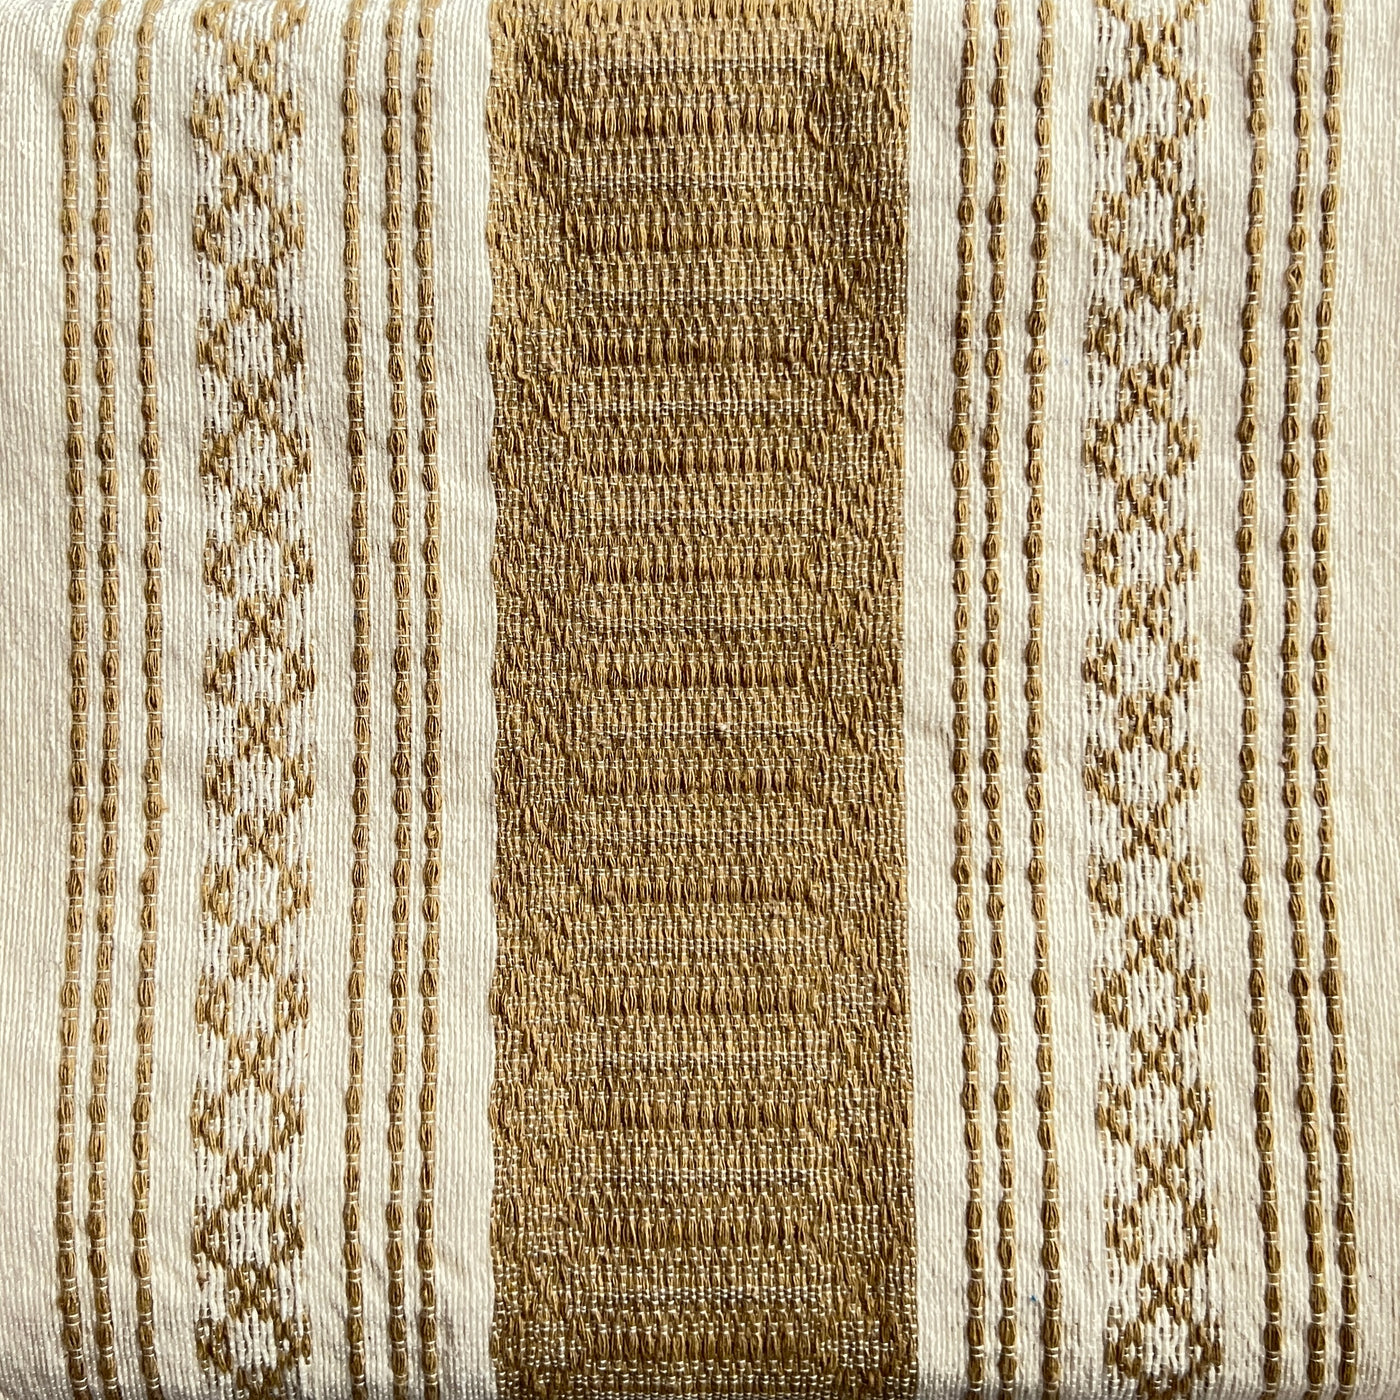 Close up view of a tan and natural striped woven table runner with tassels